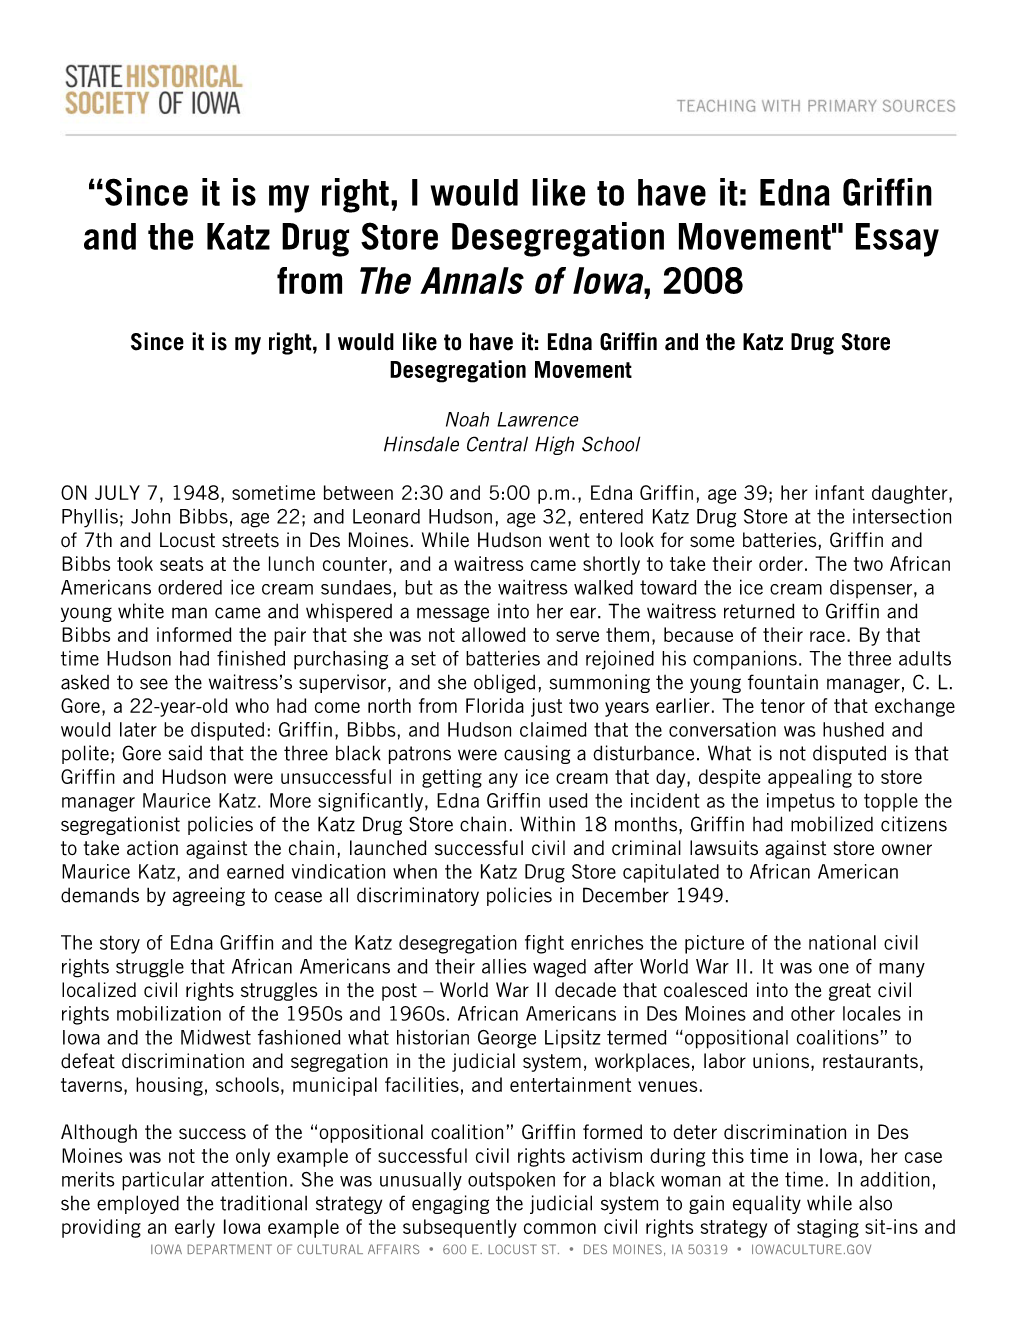 Edna Griffin and the Katz Drug Store Desegregation Movement" Essay from the Annals of Iowa, 2008